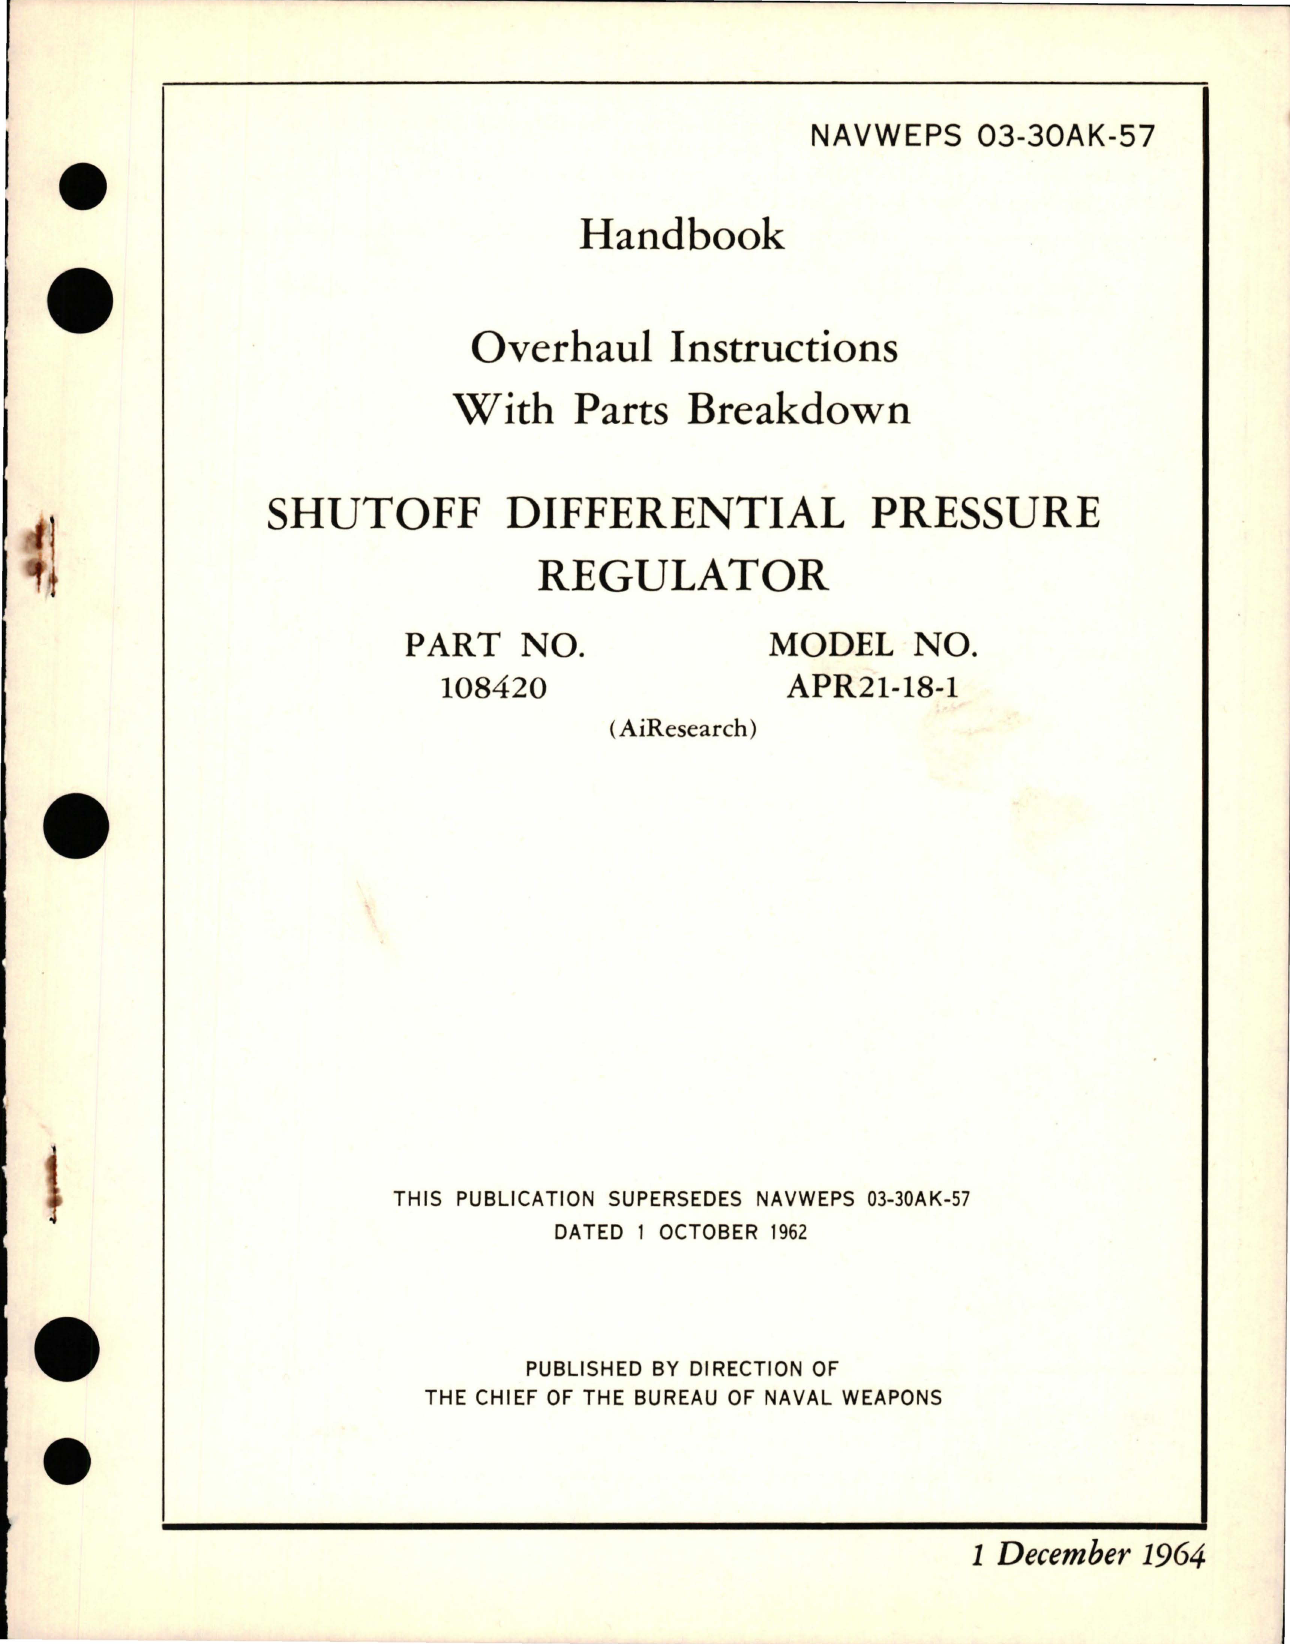 Sample page 1 from AirCorps Library document: Overhaul Instructions with Parts Breakdown for Shutoff Differential Pressure Regulator - Part 108420 - Model APR21-18-1